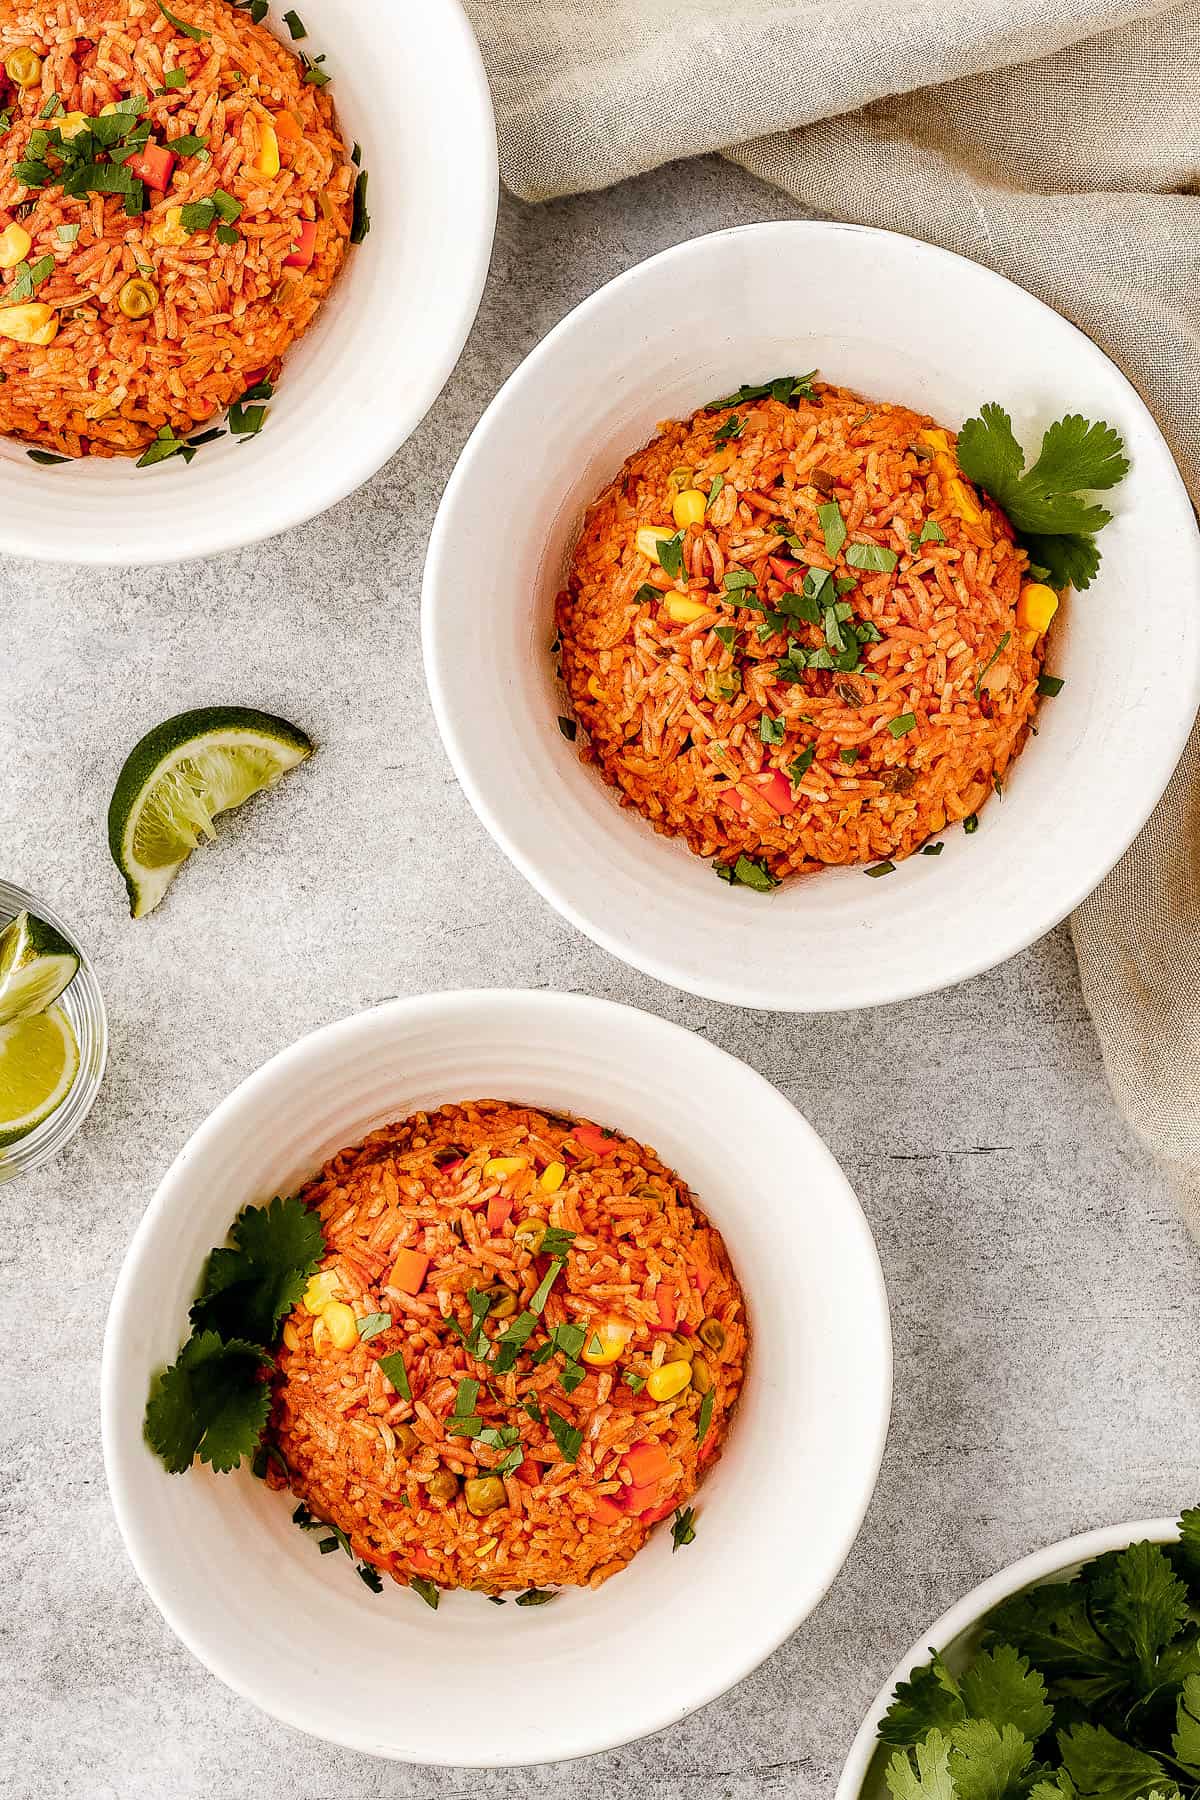 A serving of Mexican rice in a white bowl, garnished with cilantro.